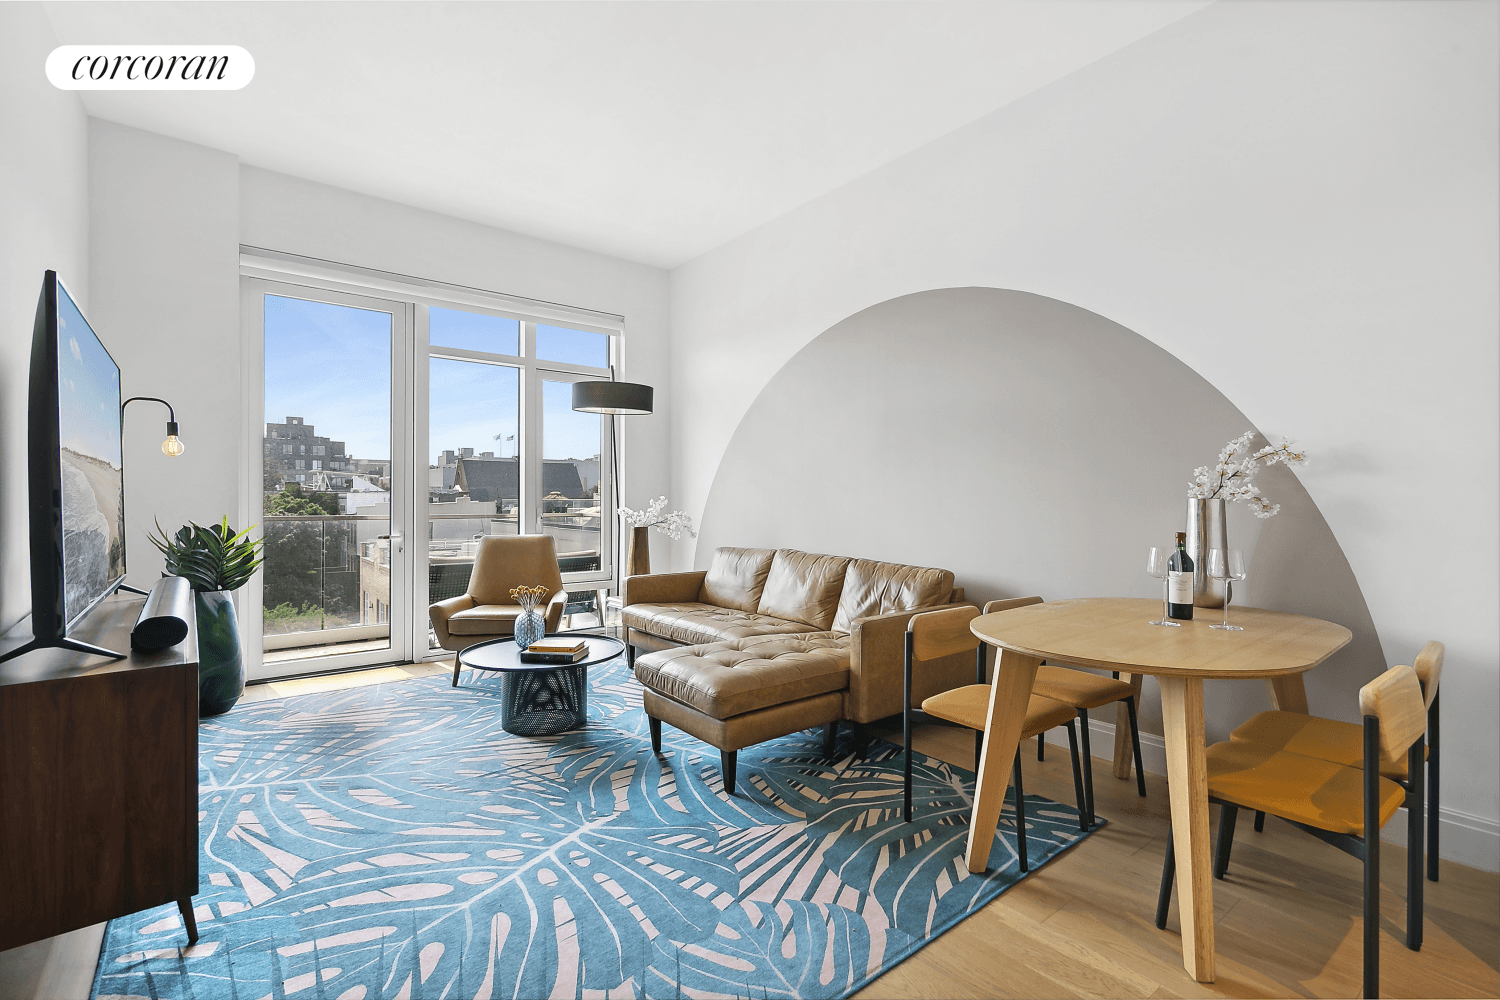 NEW ! A massive 1 Bed with Home Office and Private Balcony awaits you at Arbor Eighteen Condominium at 181 18th Street, Apt 602.